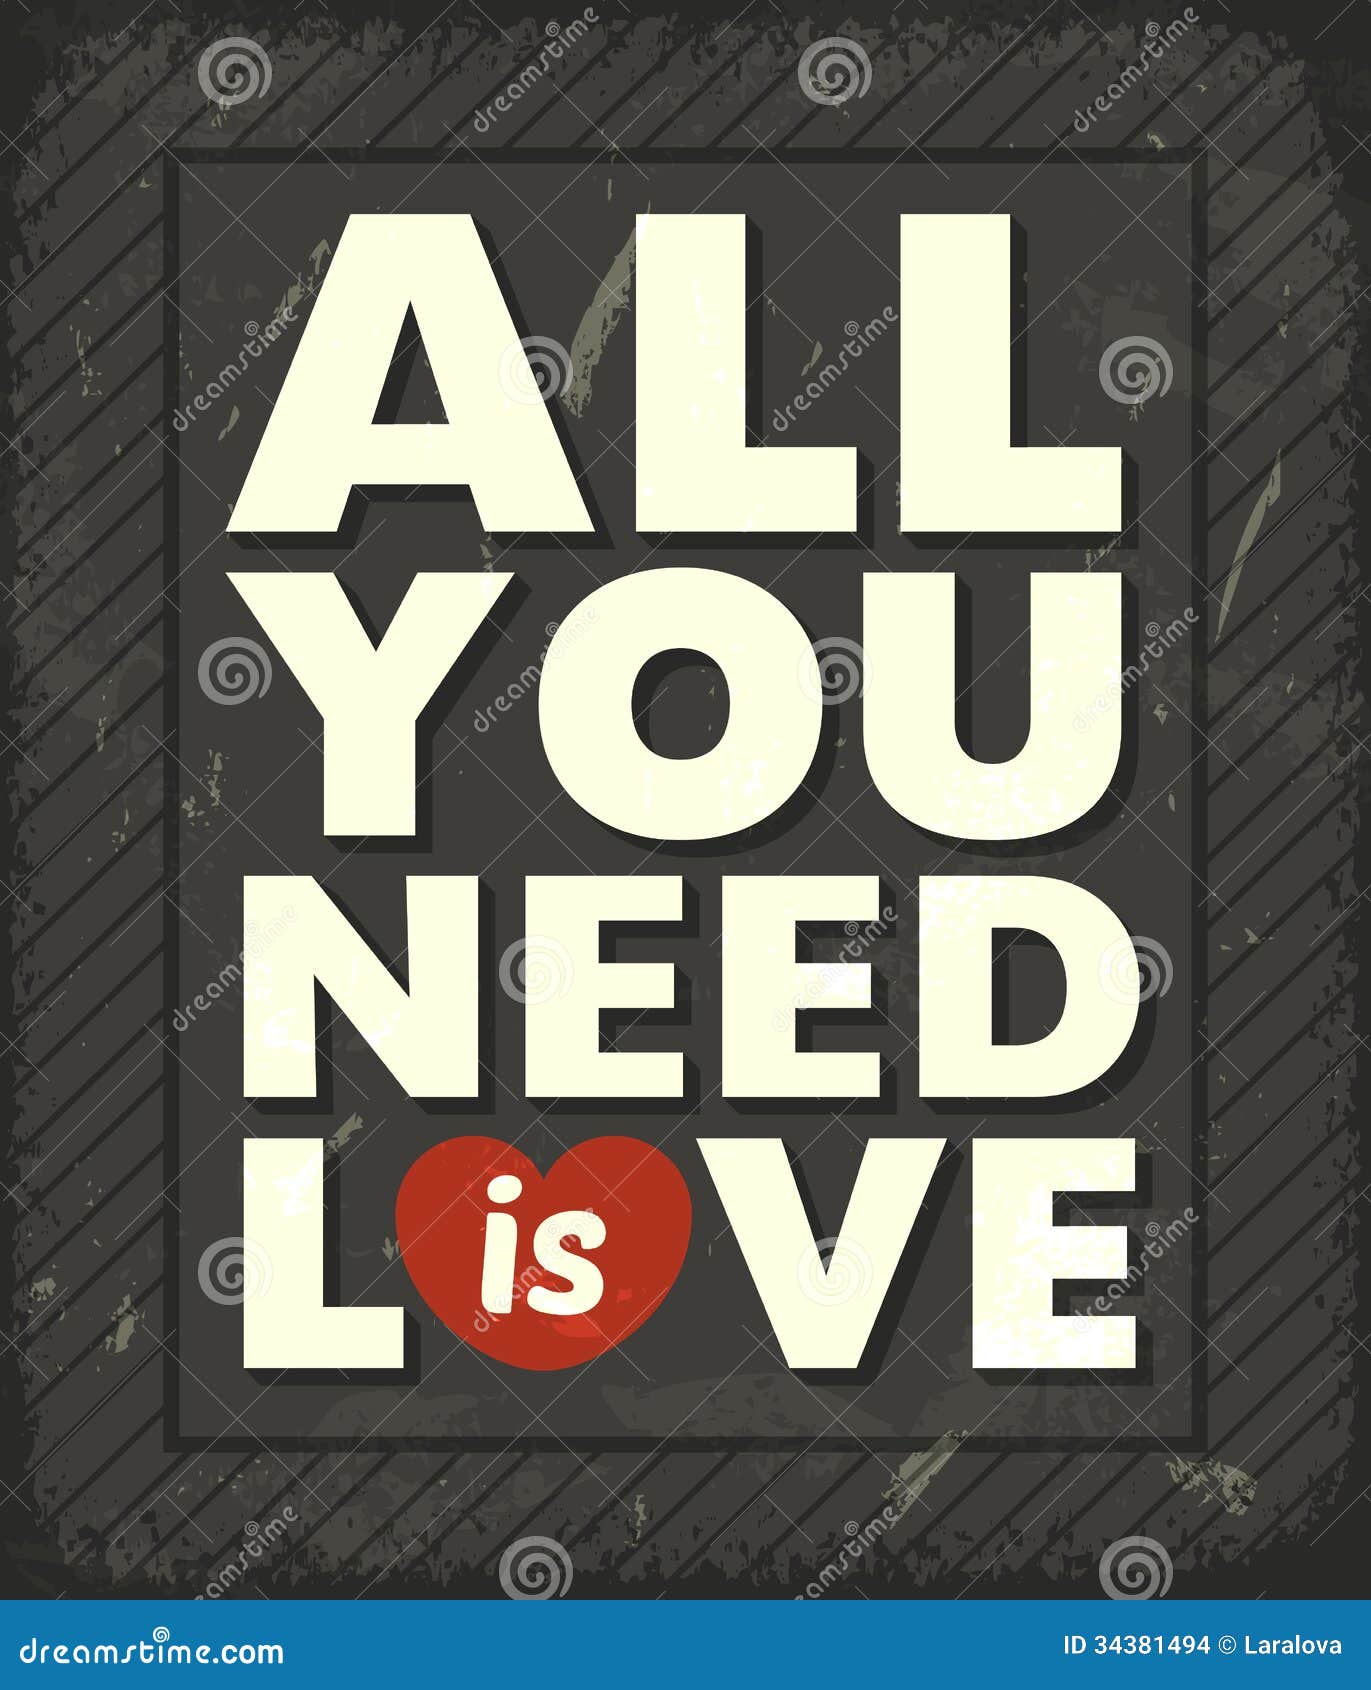 All you need is love stock vector. Illustration of card - 34381494